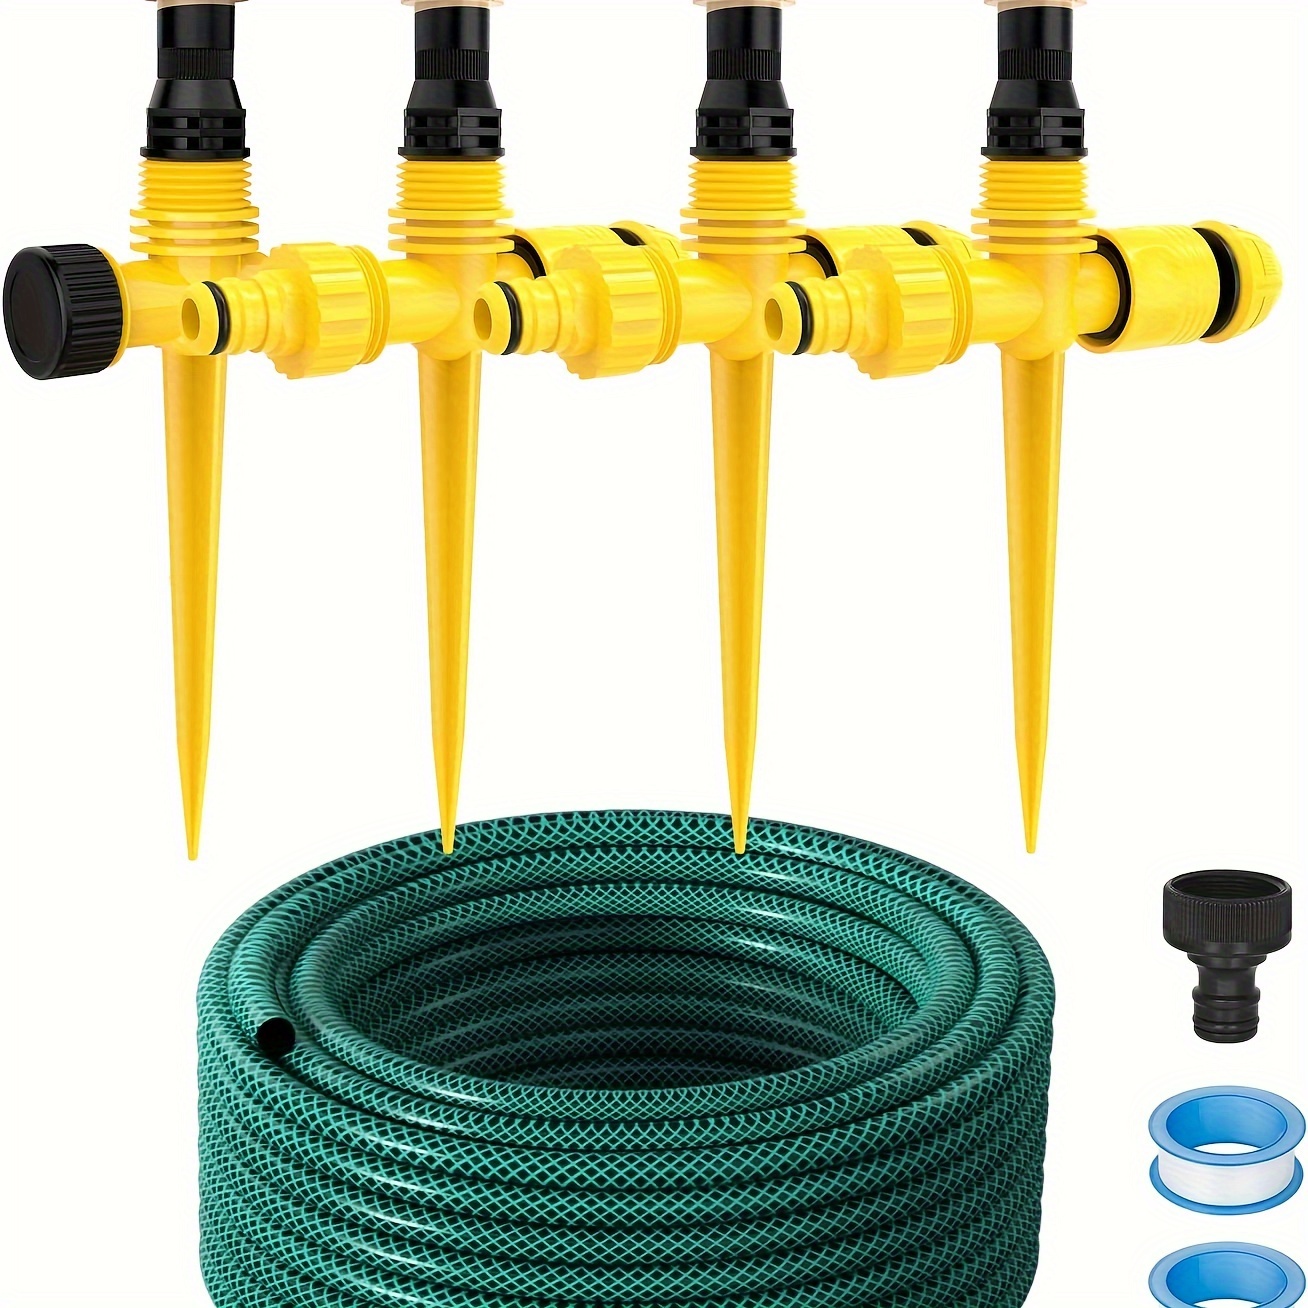 

Gejrio Garden Above Ground Sprinkler System Kit For Lawn, 360° Adjustable Irrigation System, Lawn & Garden Sprinklers Watering System With 52.5ft Hose And 8 Pipe Connectors